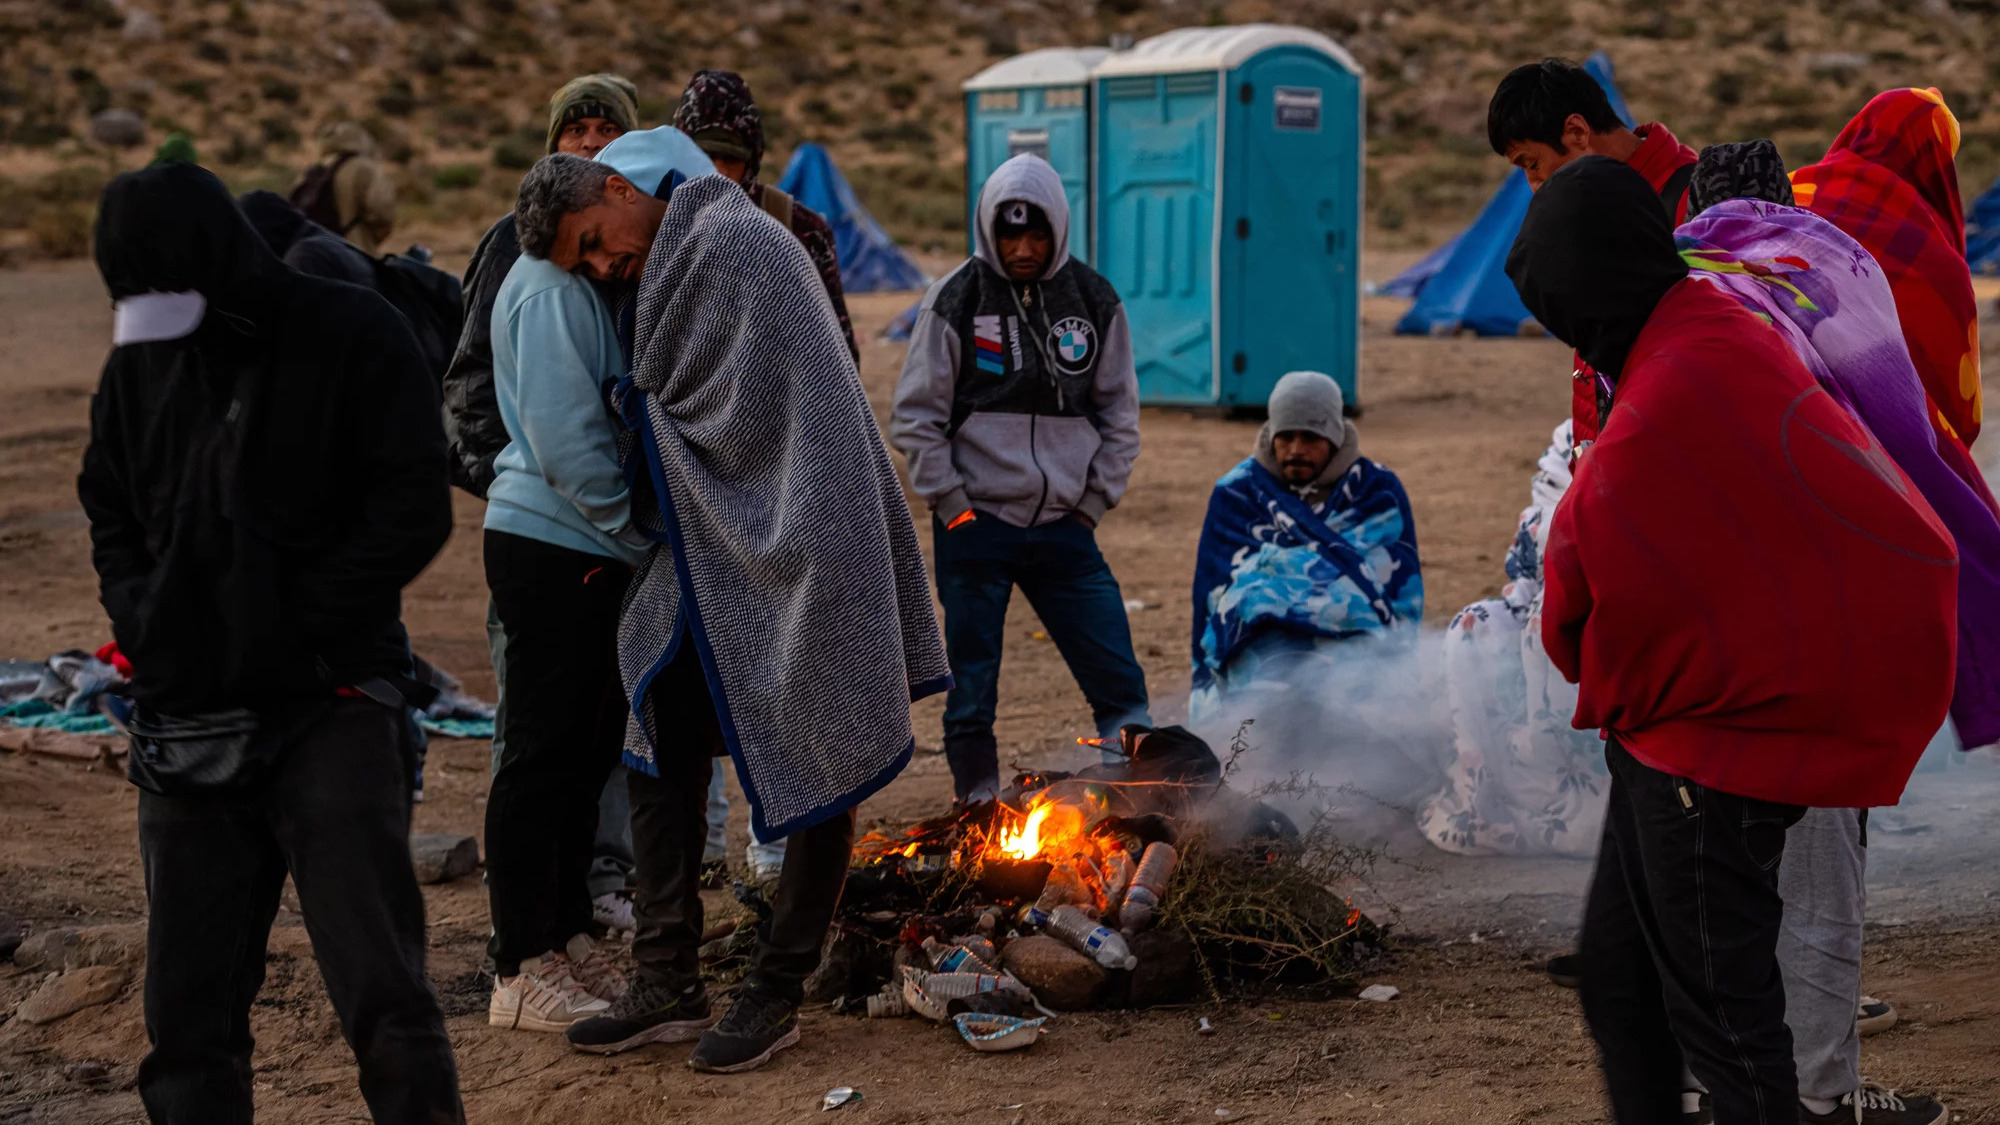 Migrants huddling for warmth at an unofficial detention camp in Jacumba, Calif.